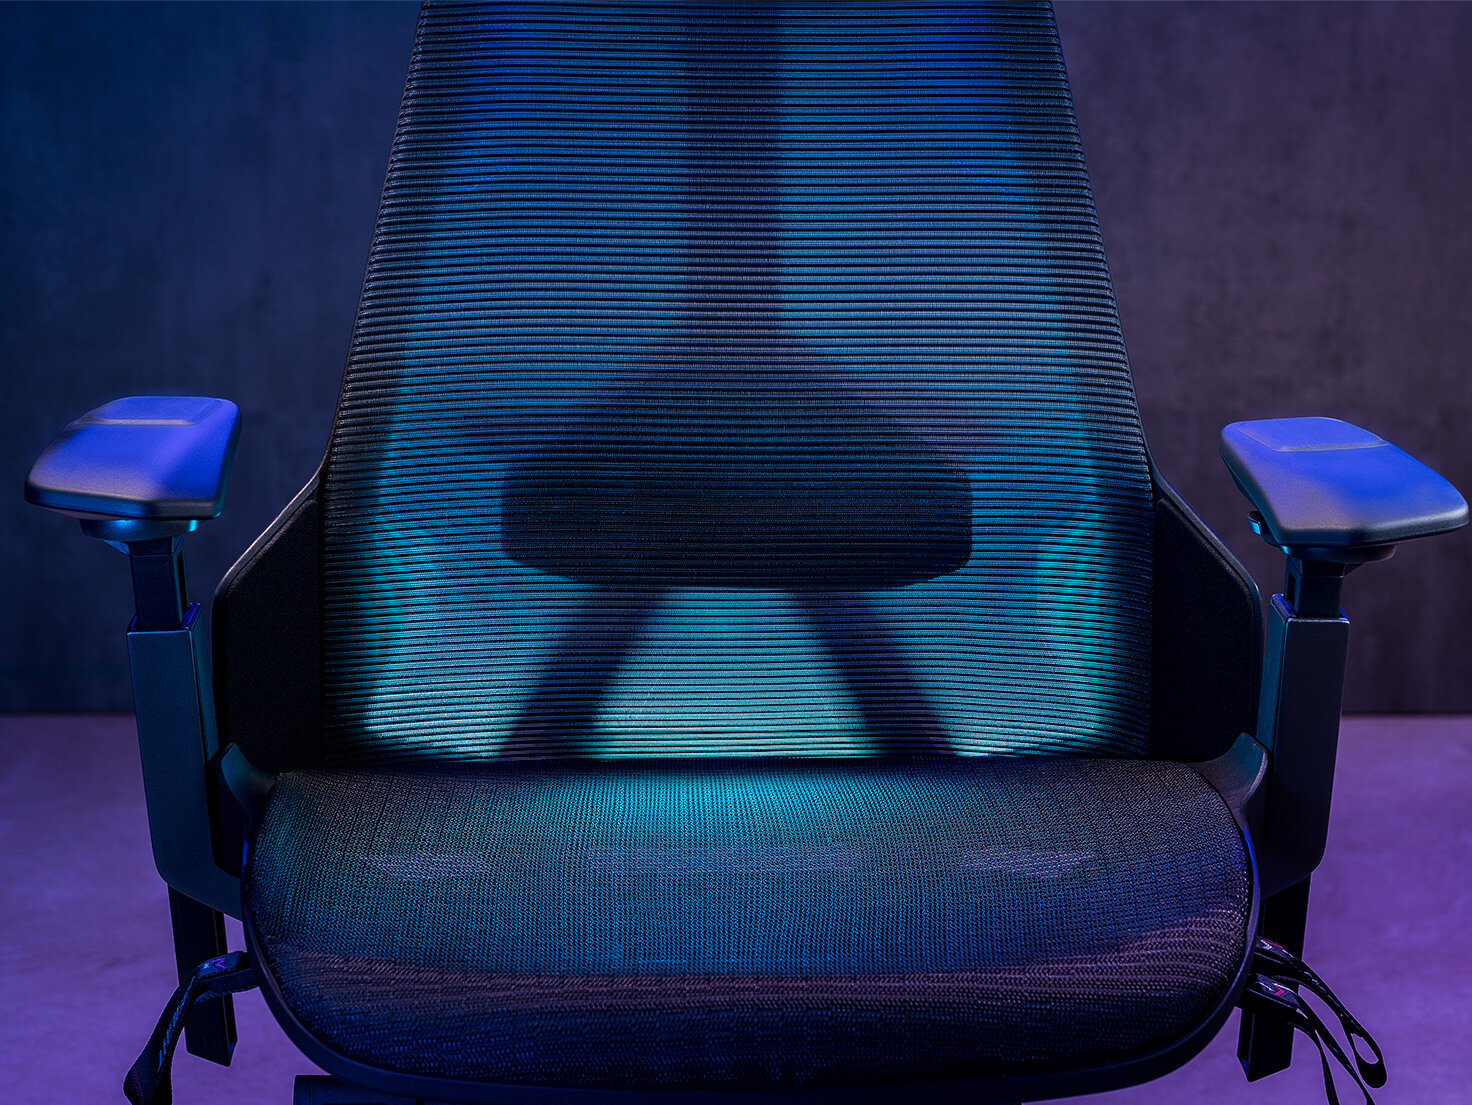 A front close-up view of the mesh material of the ROG Destrier Ergo Gaming Chair